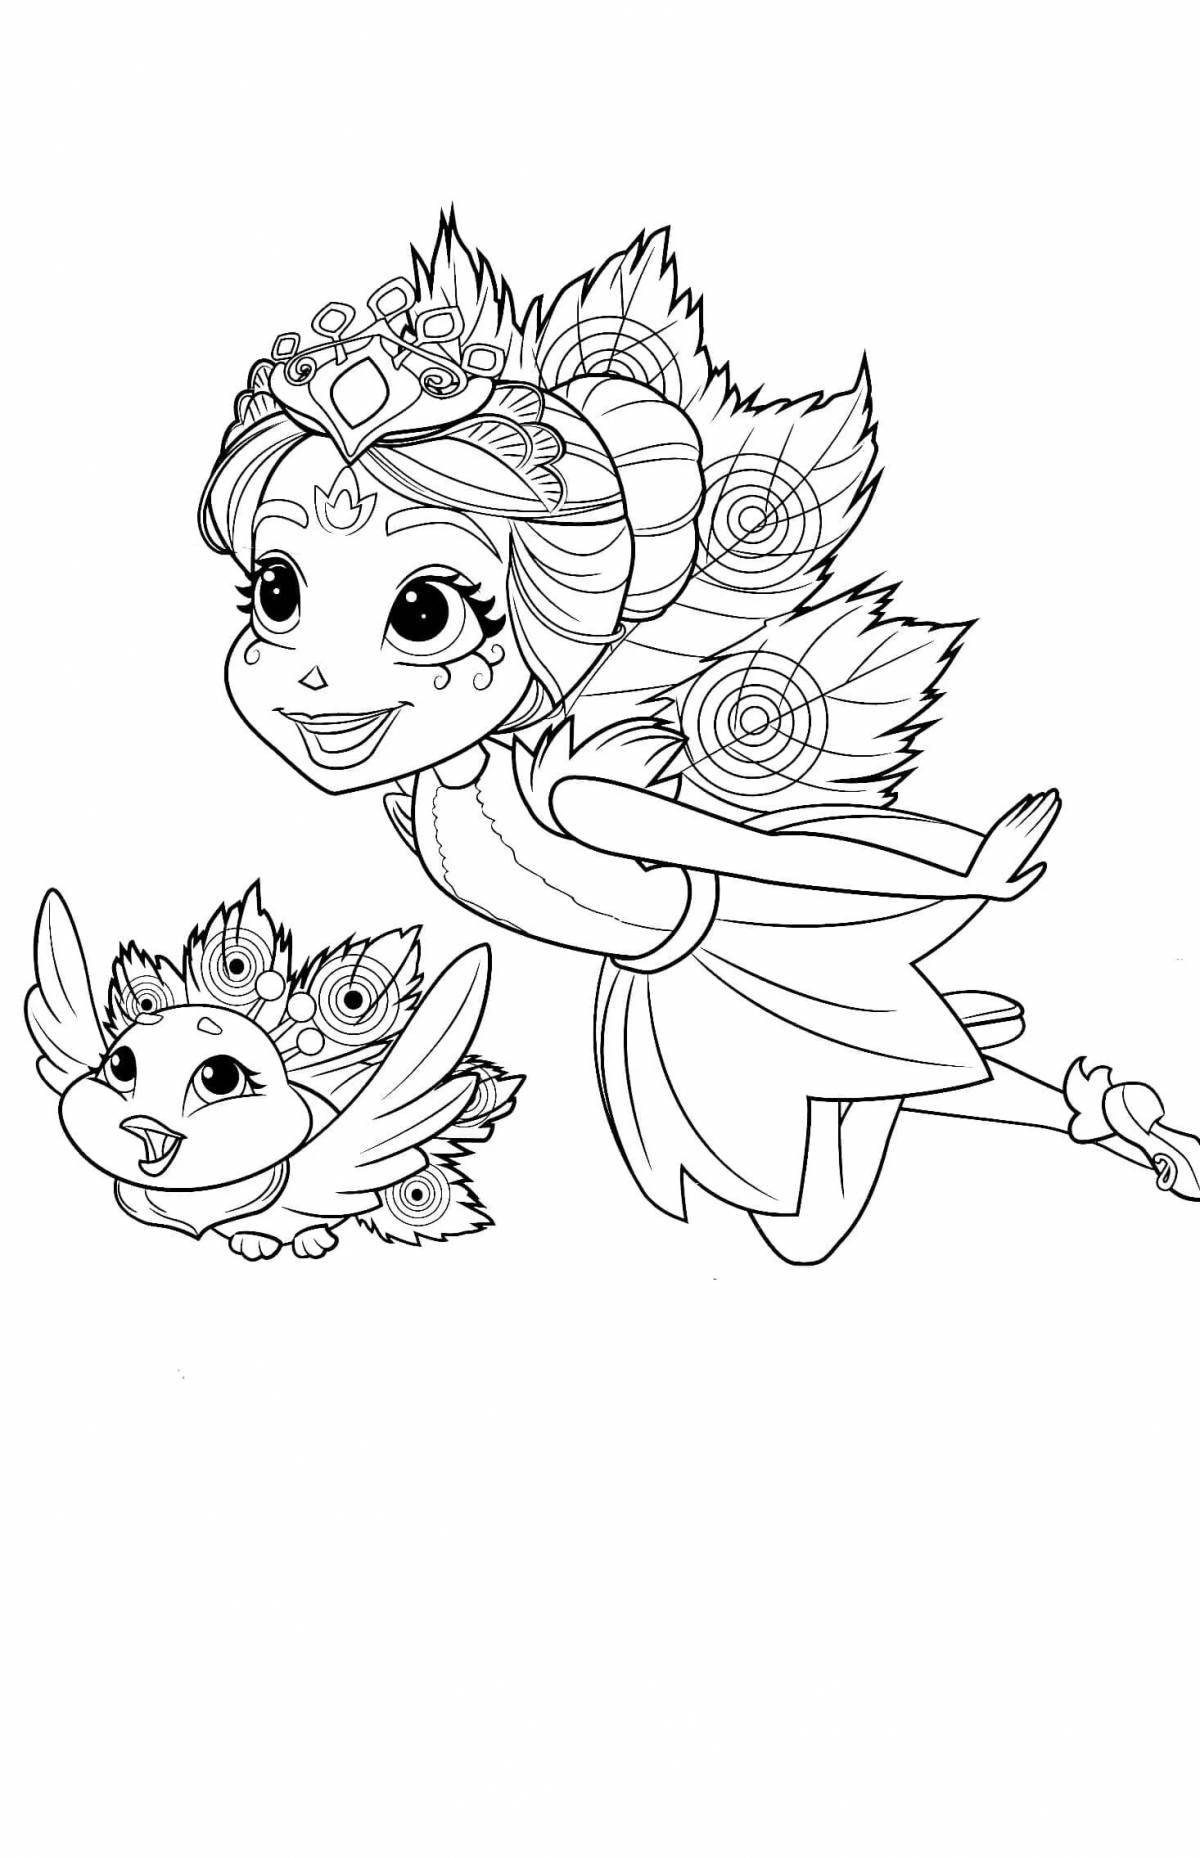 Inchatimols amazing coloring pages